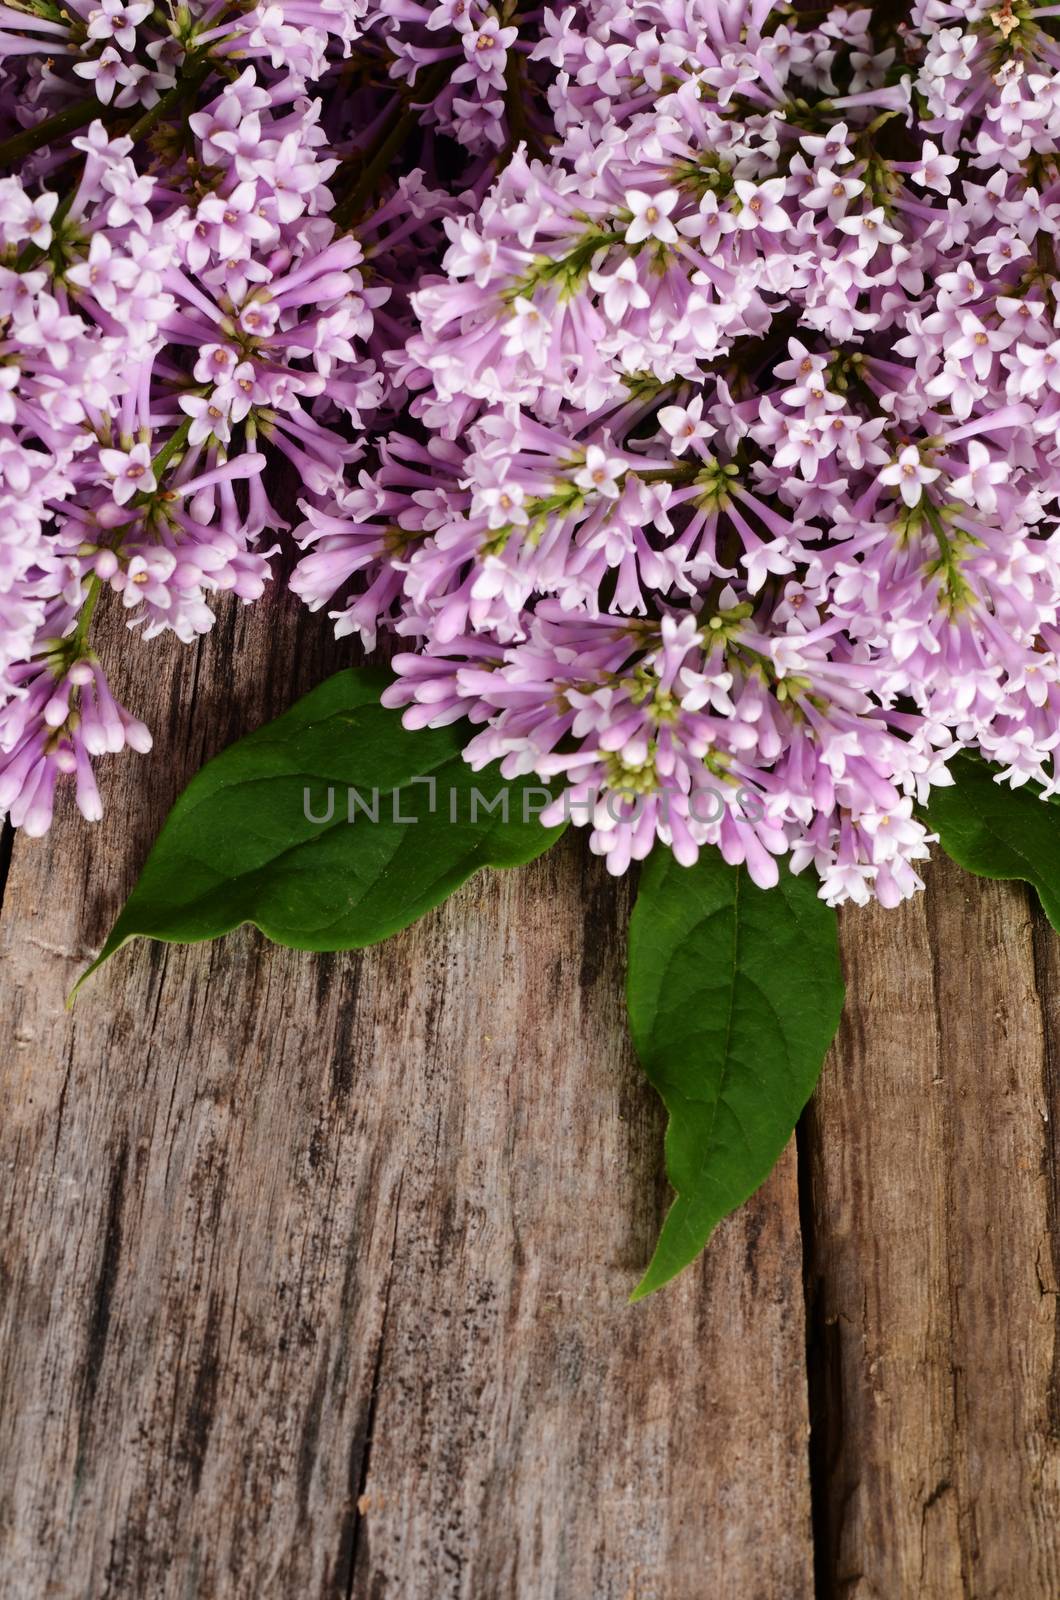 The flower lilac a wooden background by SvetaVo